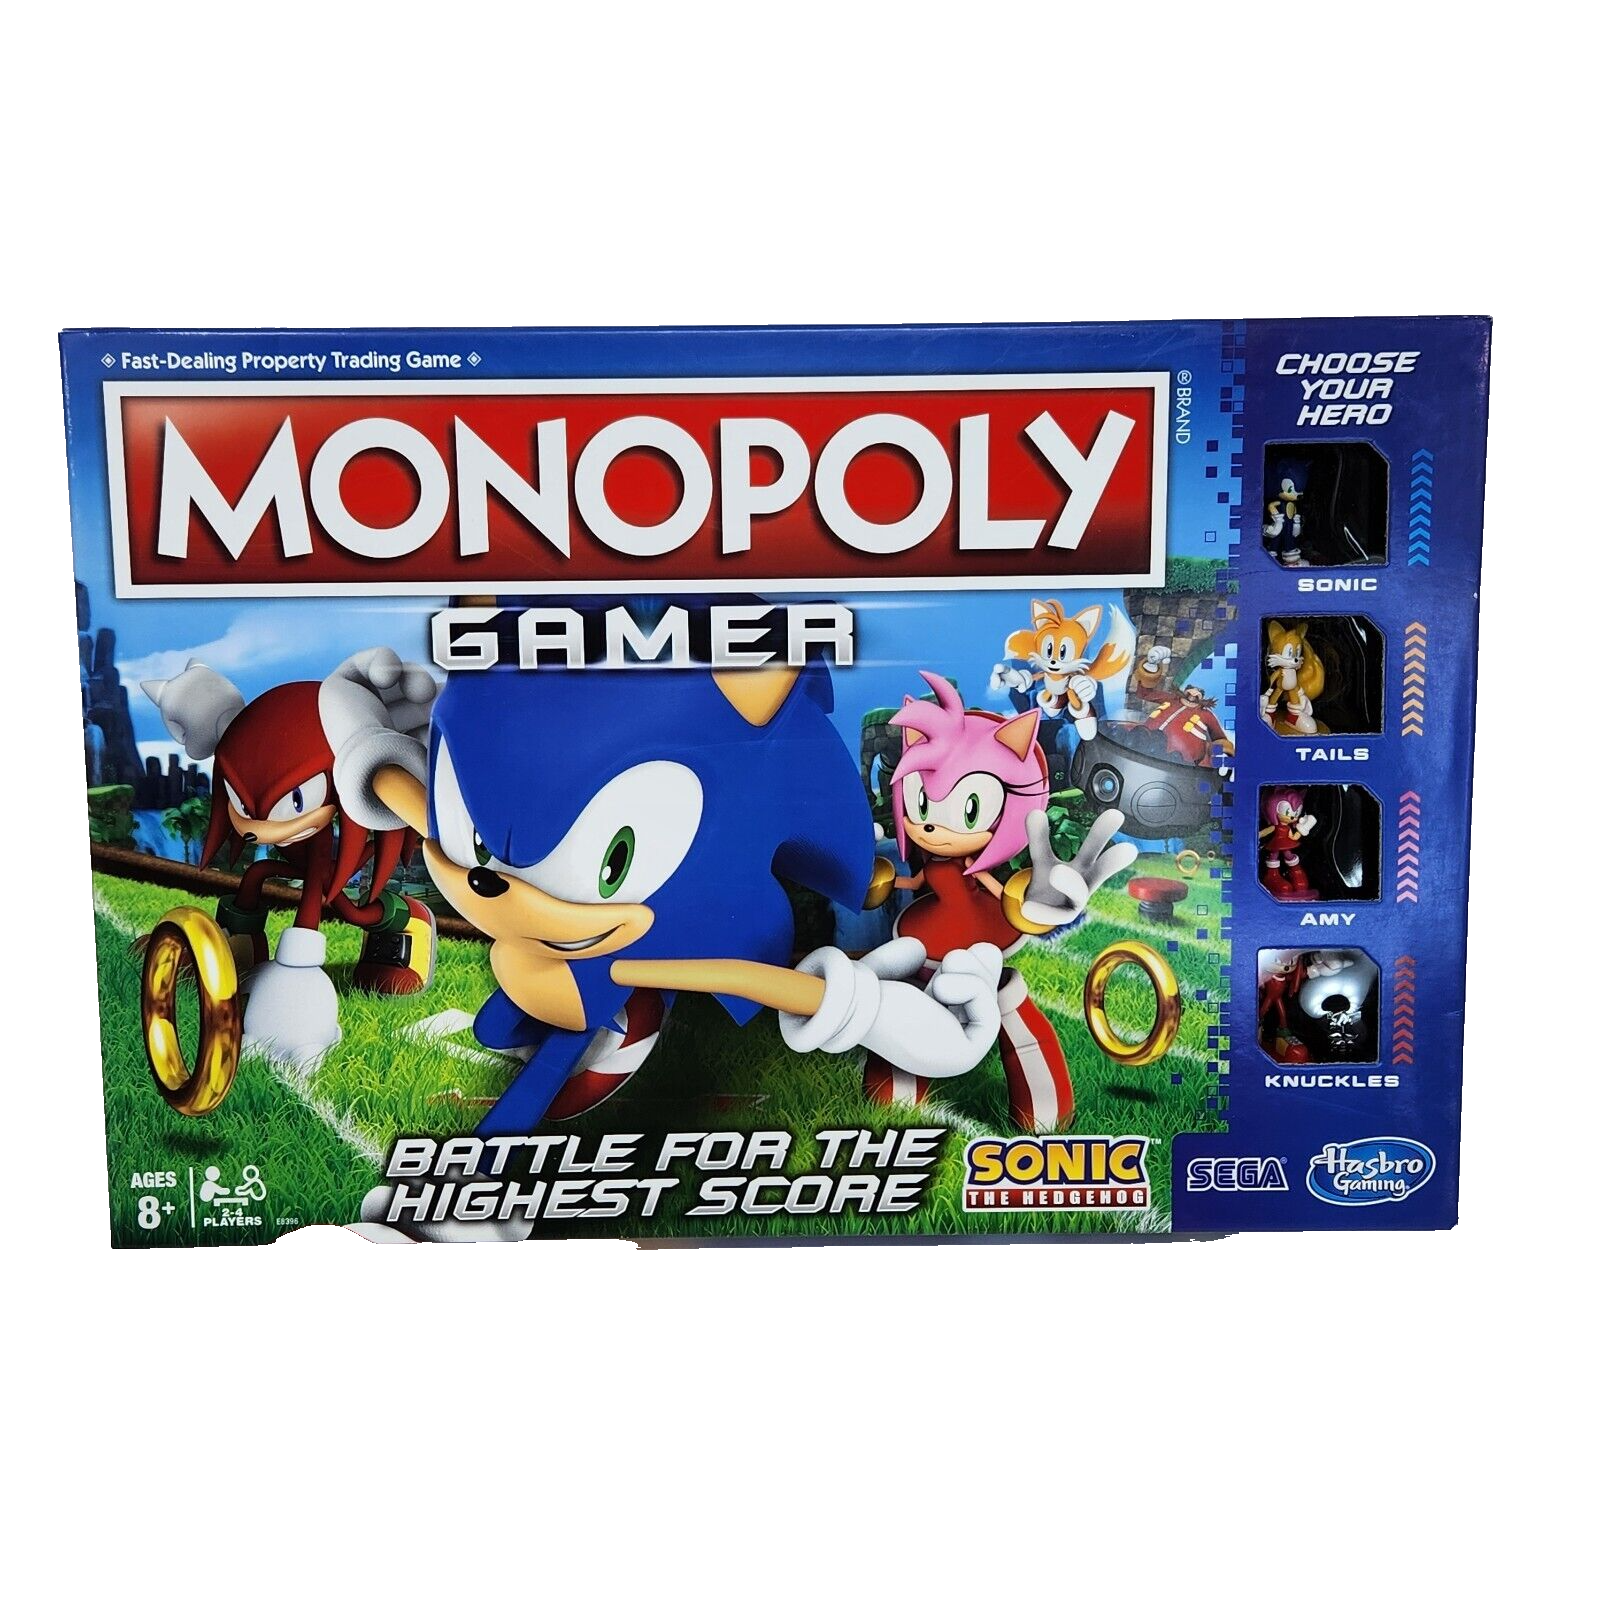 MONOPOLY GAMER SONIC THE HEDGEHOG BOARD GAME 100% COMPLETE 2018 - $71.25